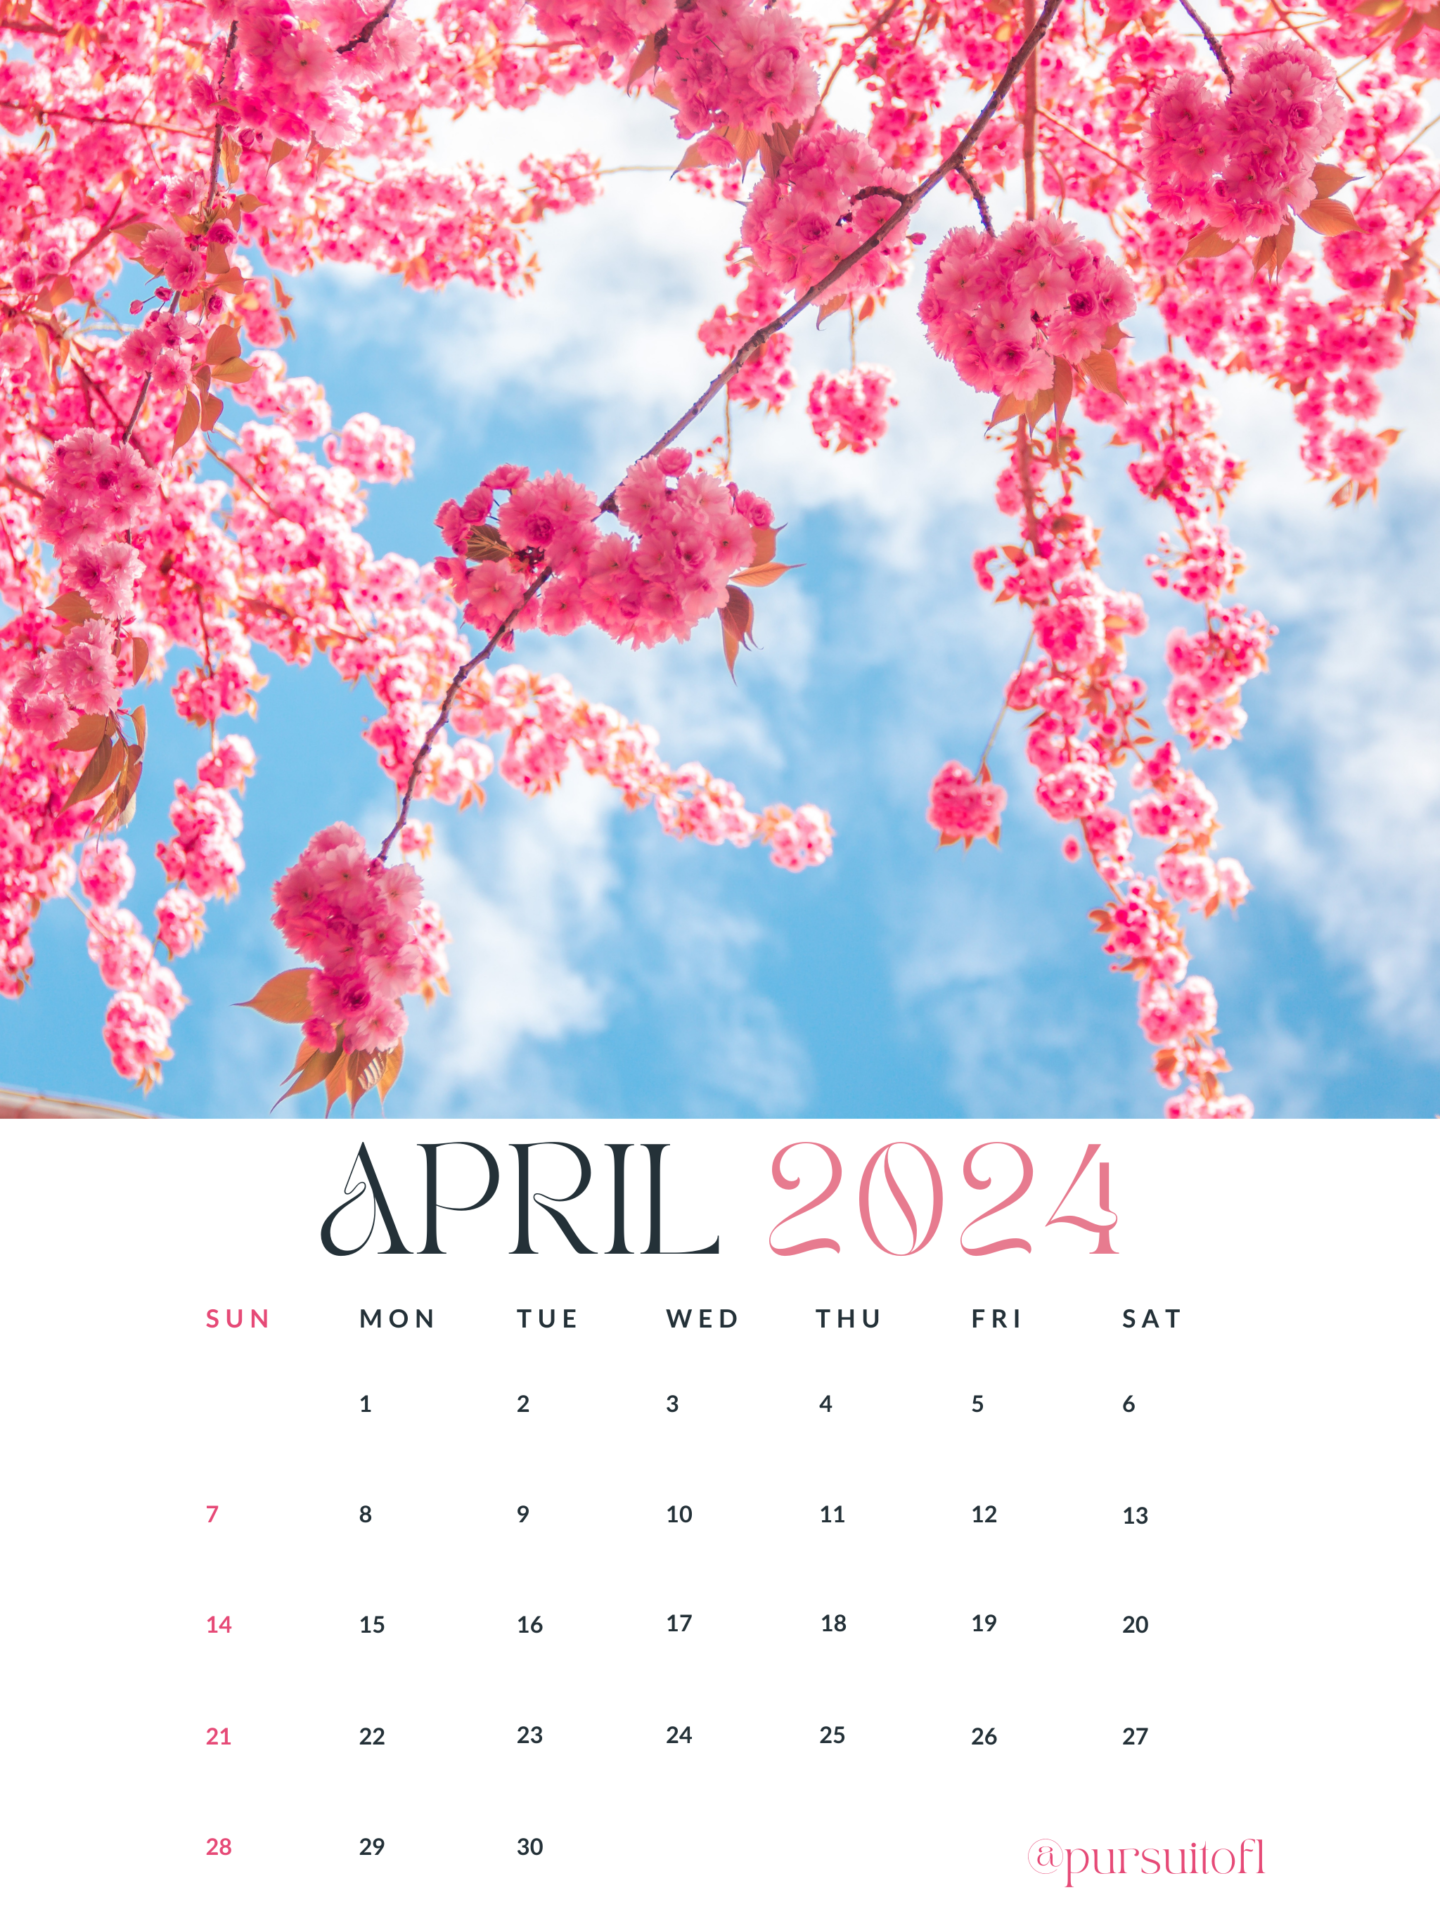 April 2024 calendar tablet wallpaper with cherry blossoms